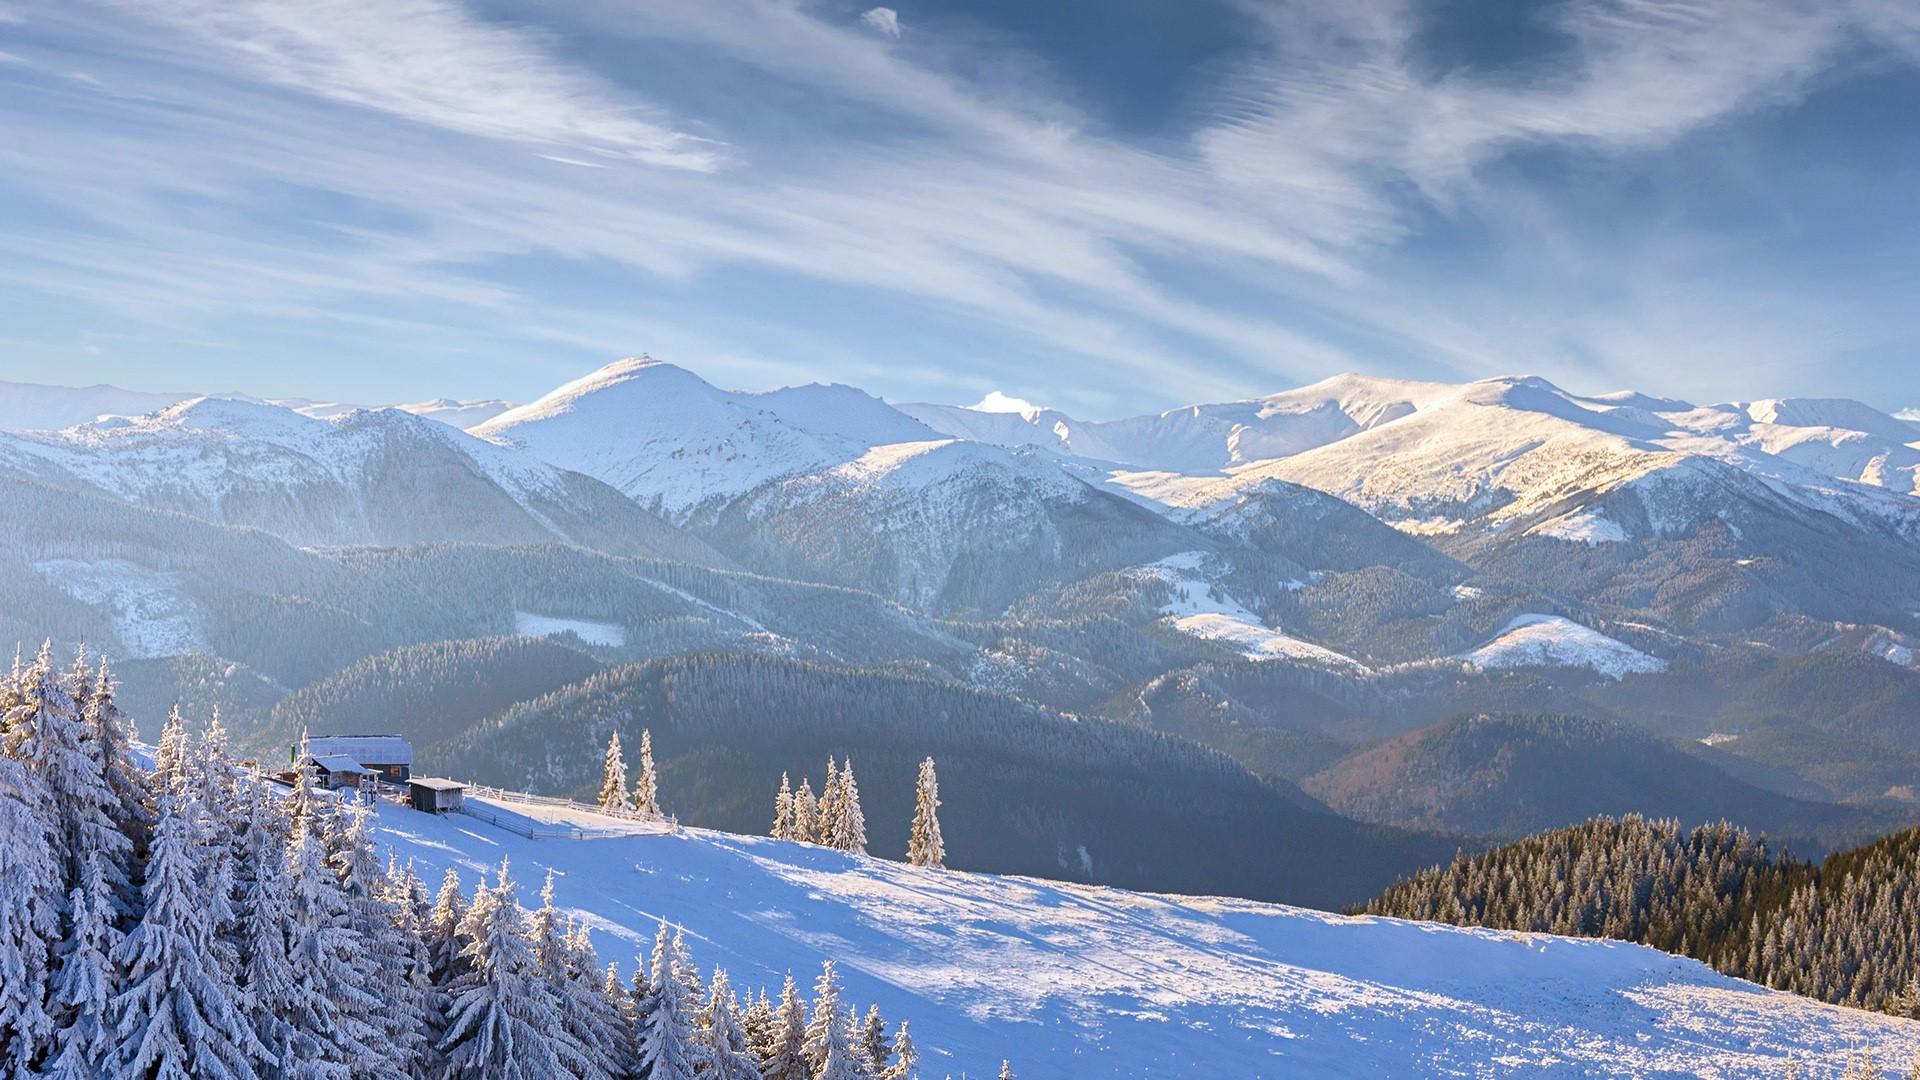 Nature Landscape Mountains Trees Snow Clouds Sky Sunlight Morning House Winter Caucasus Mountains Eu 1920x1080